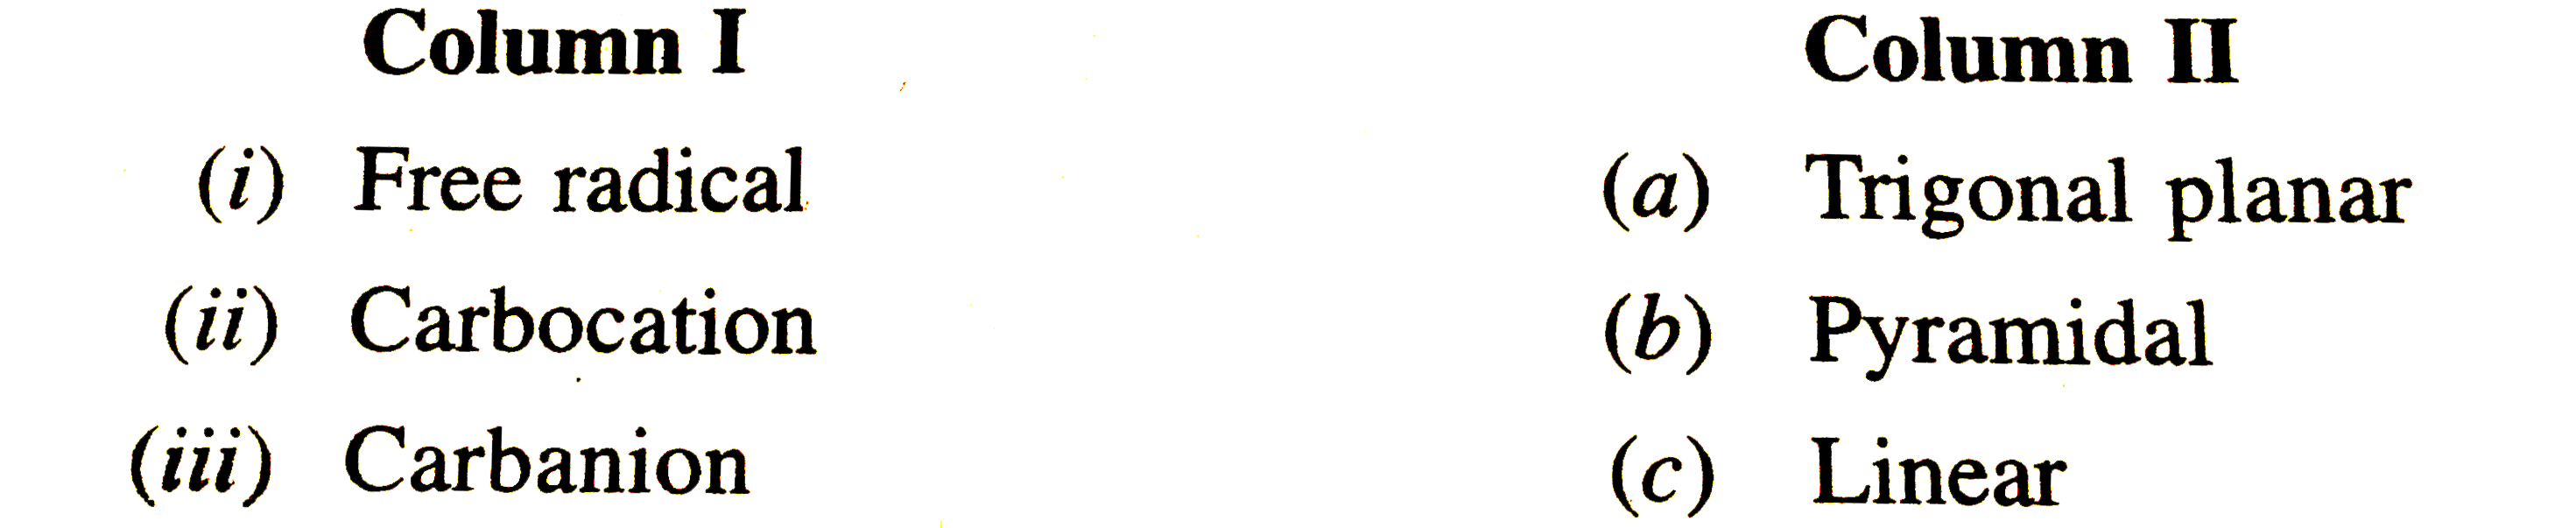 Match the intermediates given in Column I with their probable structure in Column II.